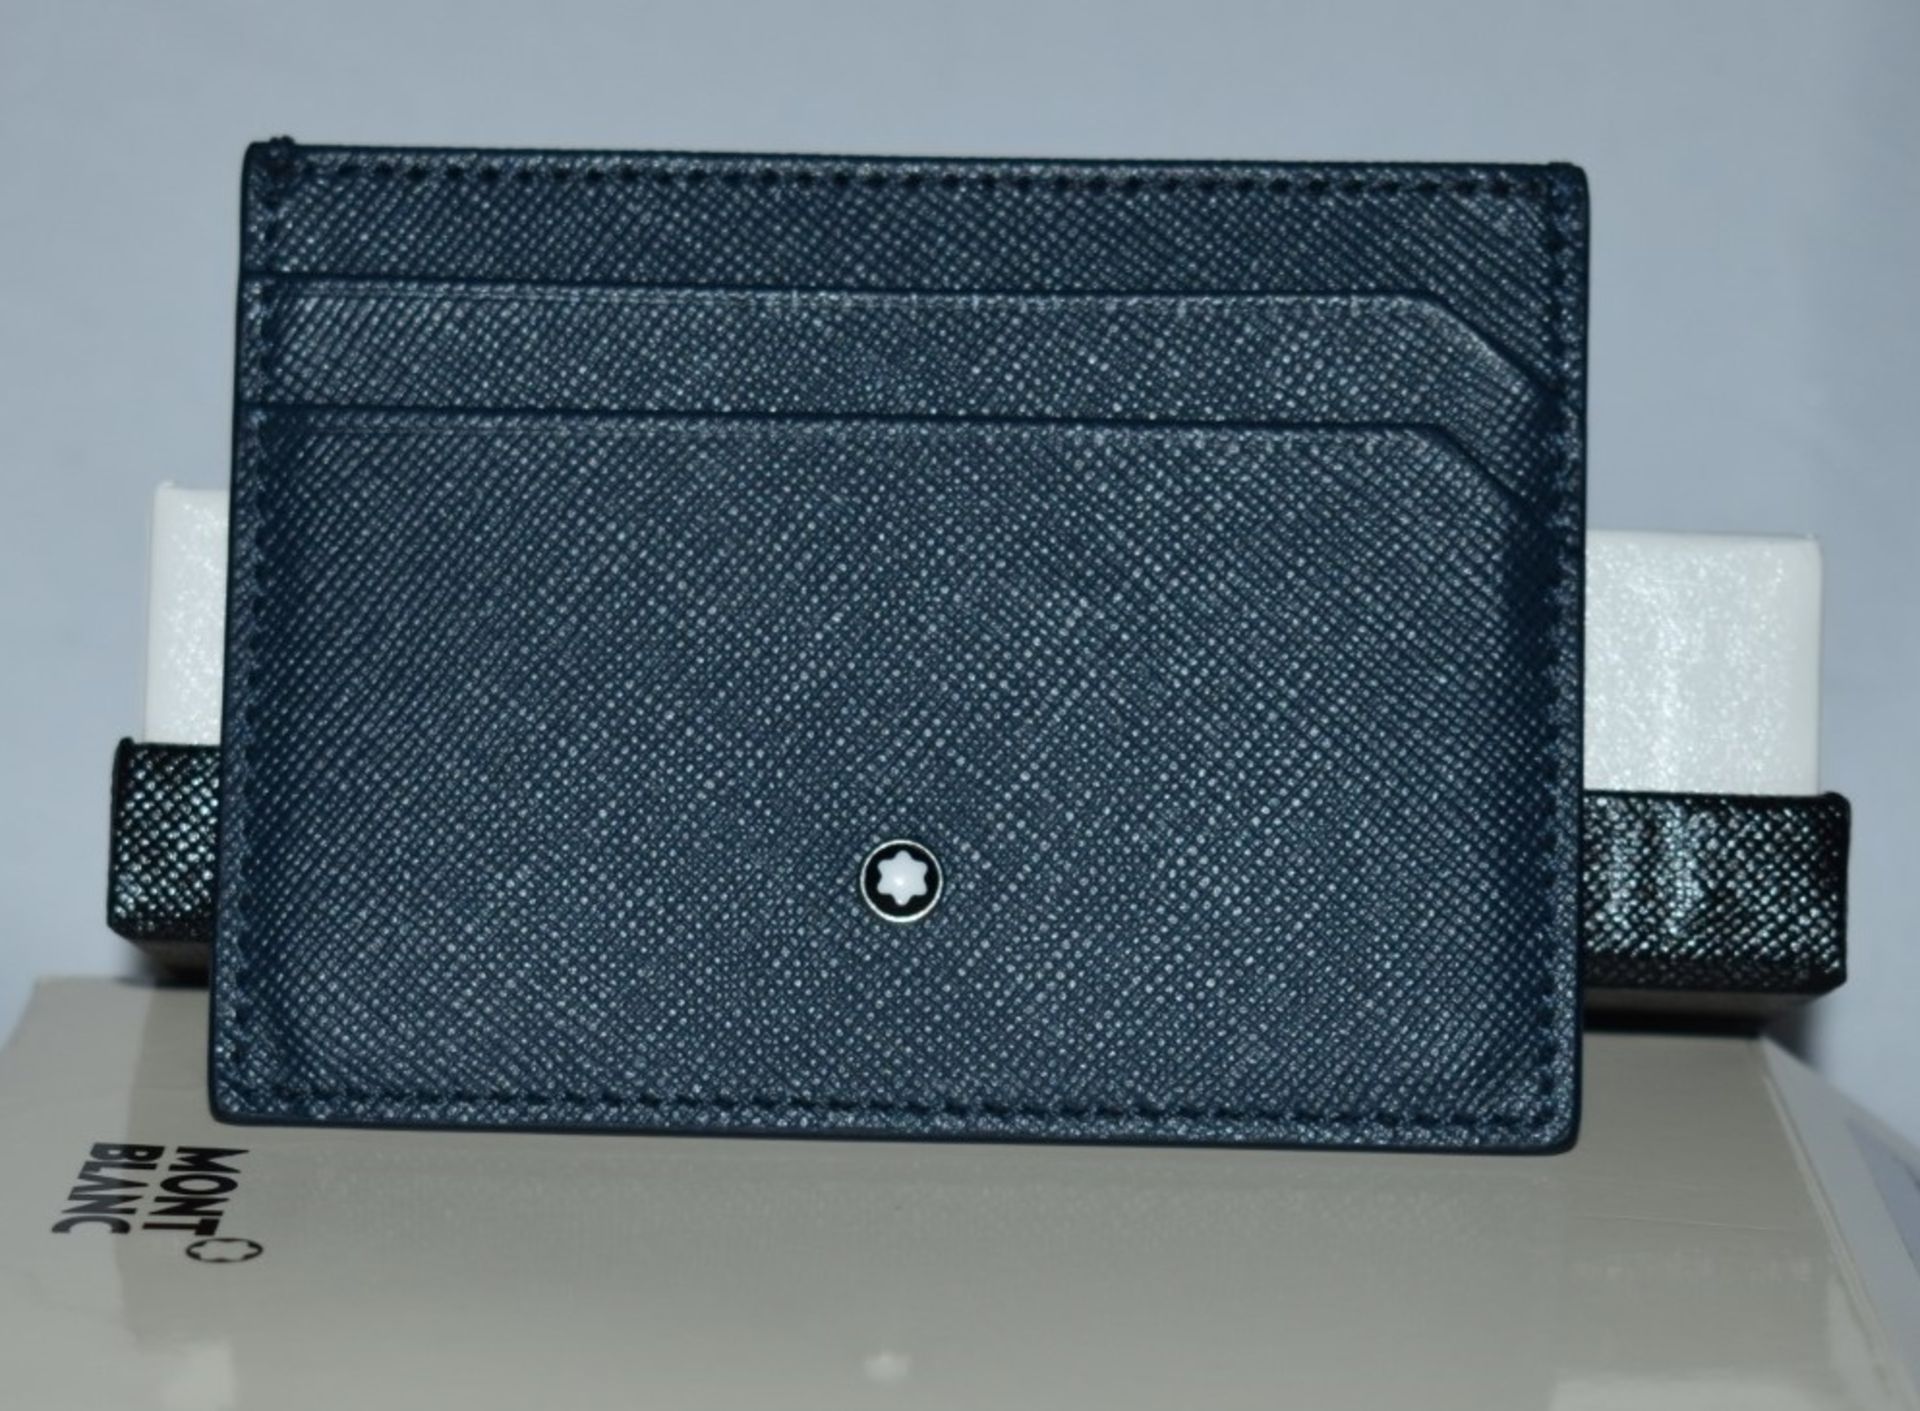 1 x MONTBLANC Sartorial Blue Luxury Leather Card Holder - Original Price £160.00 - Boxed Stock - Image 4 of 10